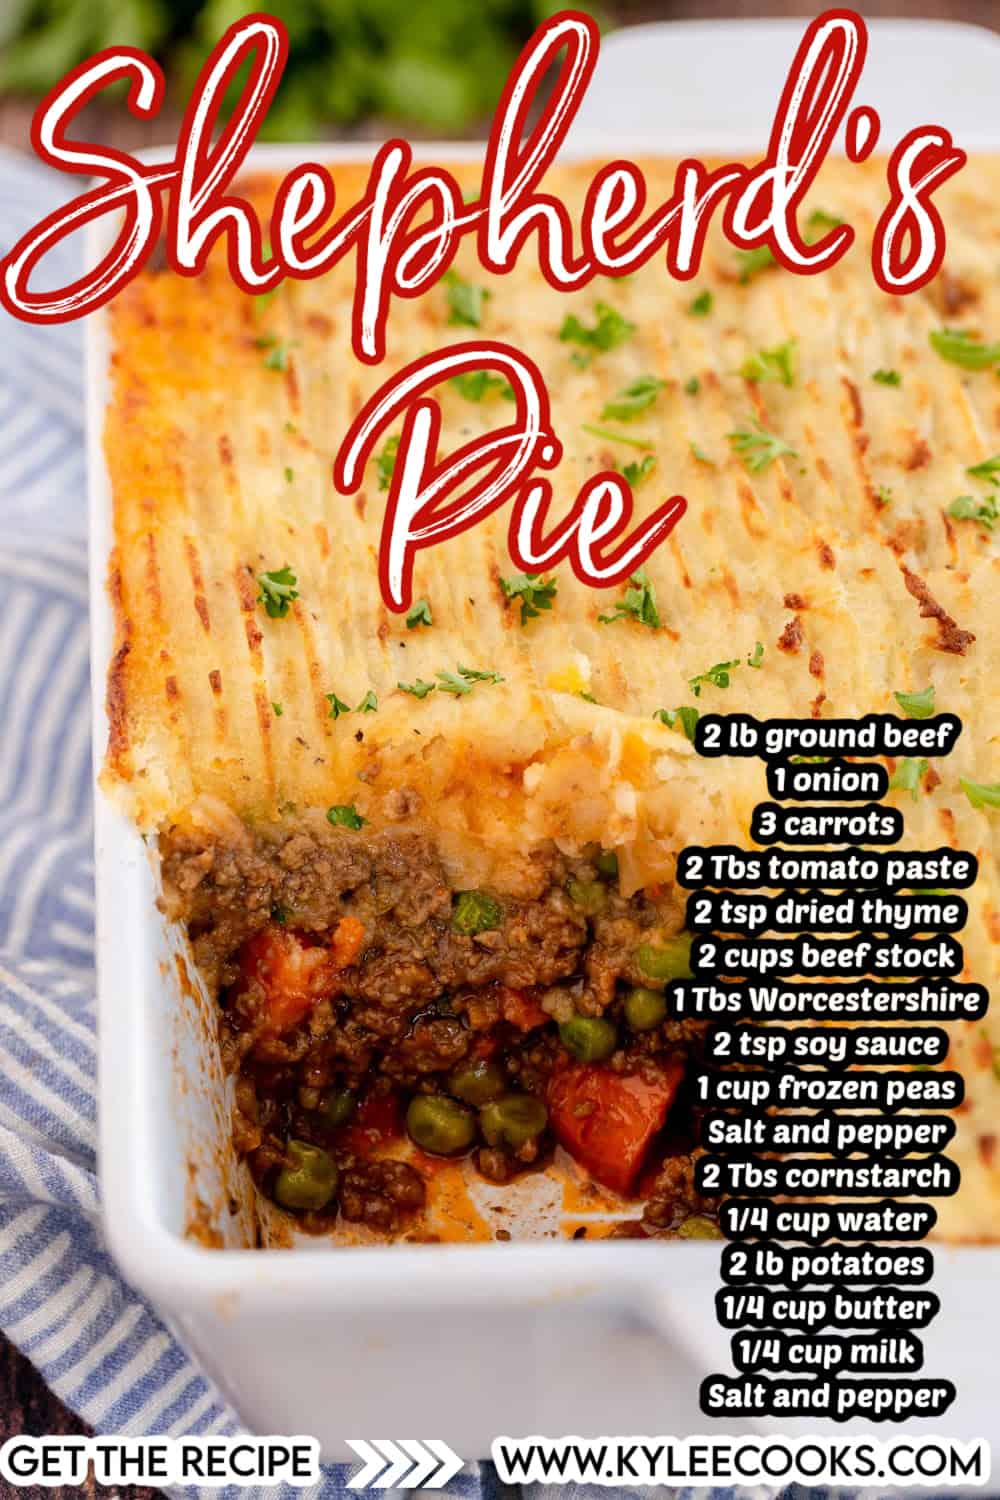 shepherd's pie with a scoop removed showing the inside with recipe title and ingredients overlaid in text